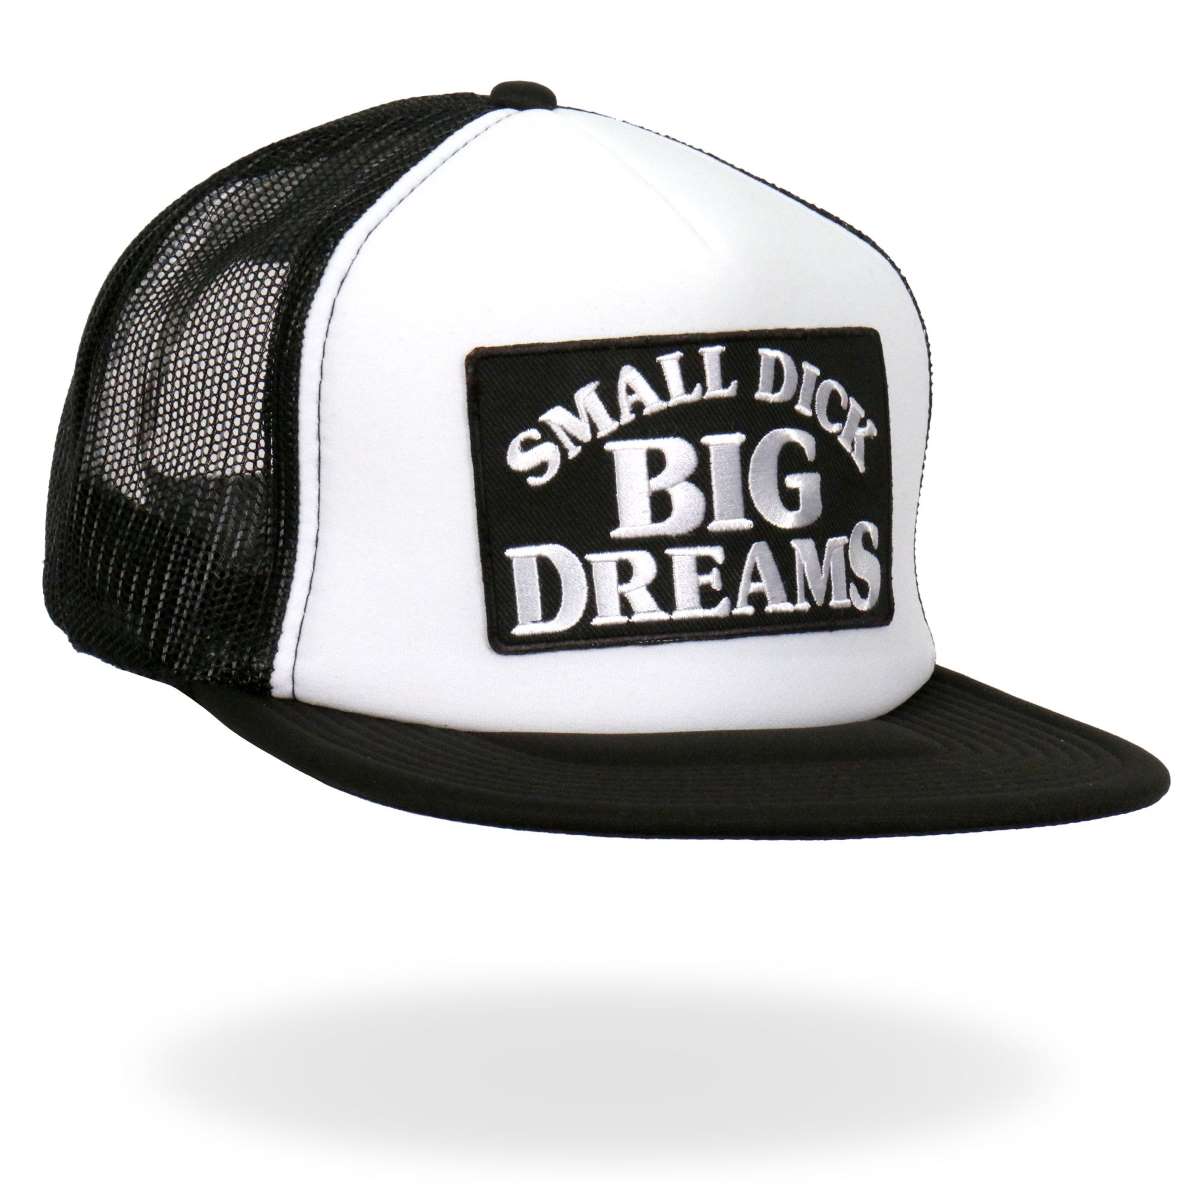 Hot Leathers Small Dick Big Dreams Snap Back Trucker Hat GSH2039